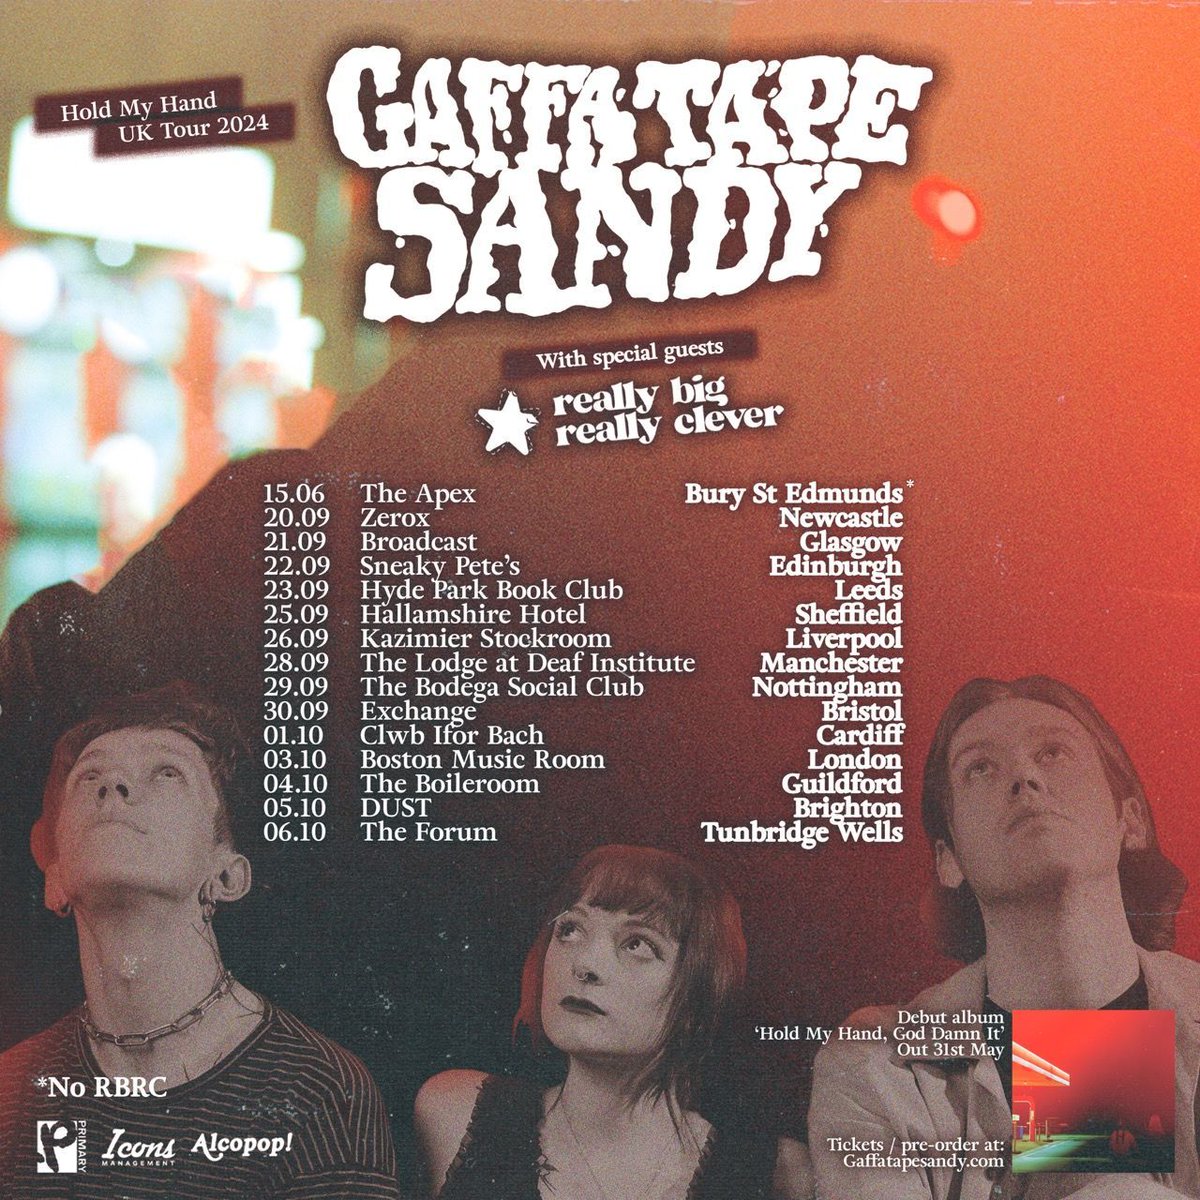 Support announced for for GAFFA TAPE SANDY, it's the awesome REALLY BIG REALLY CLEVER 🎓